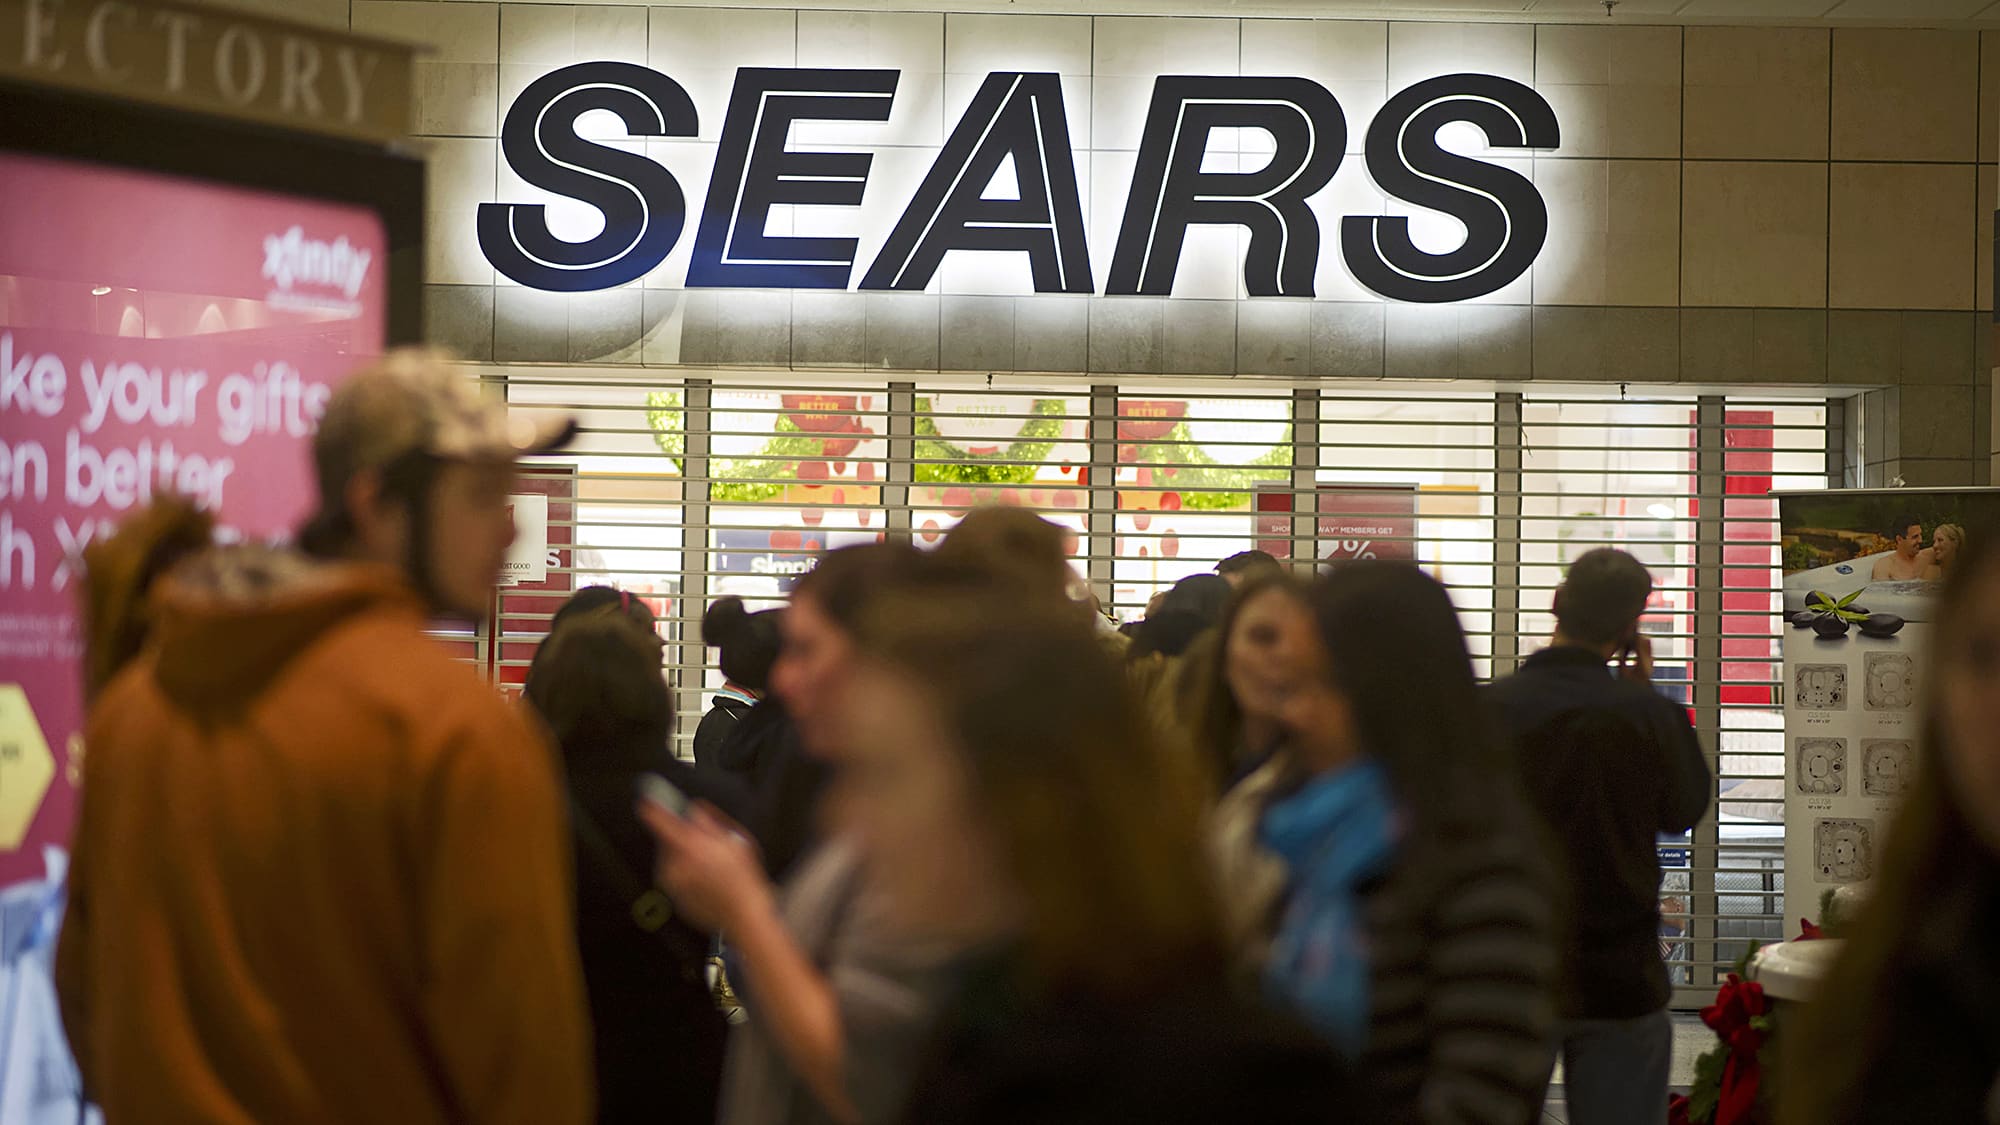 Sears will open its stores on Thanksgiving Day